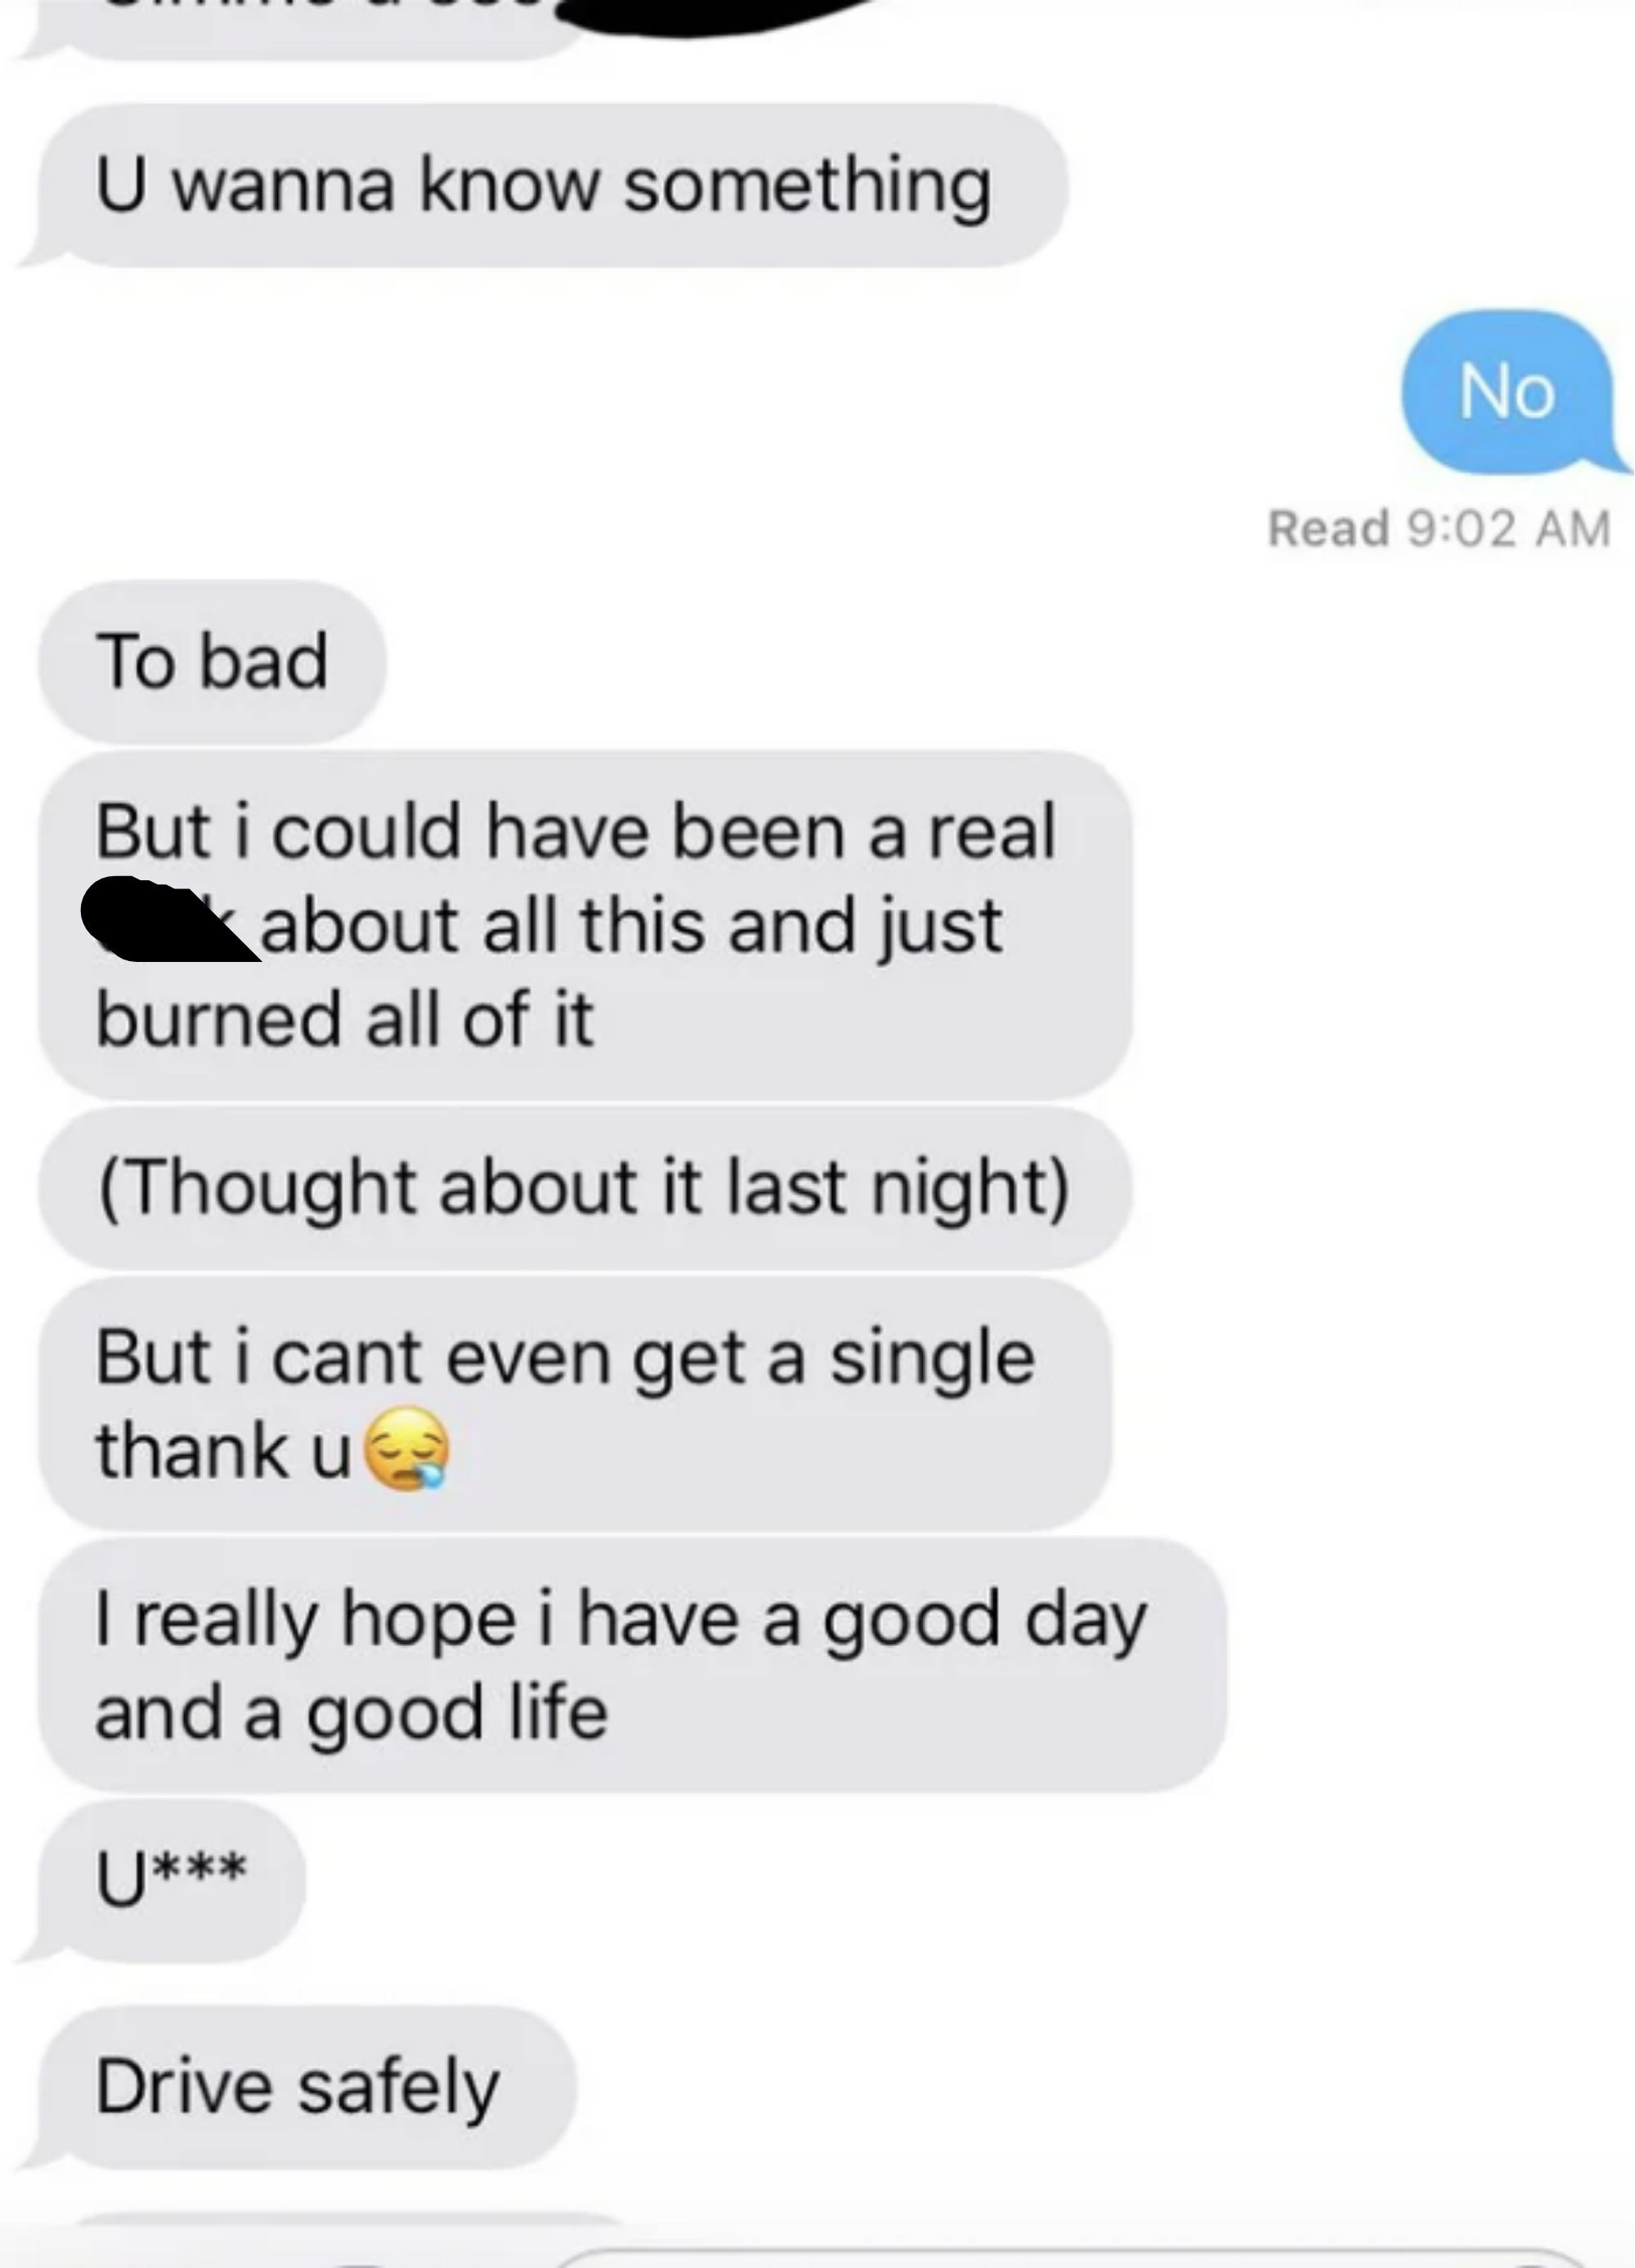 &quot;I could have have been a real dick about all this and just burned all of it, but I can&#x27;t get a single think u;  reallyI hope I have a good day and a good life, drive safely&quot;